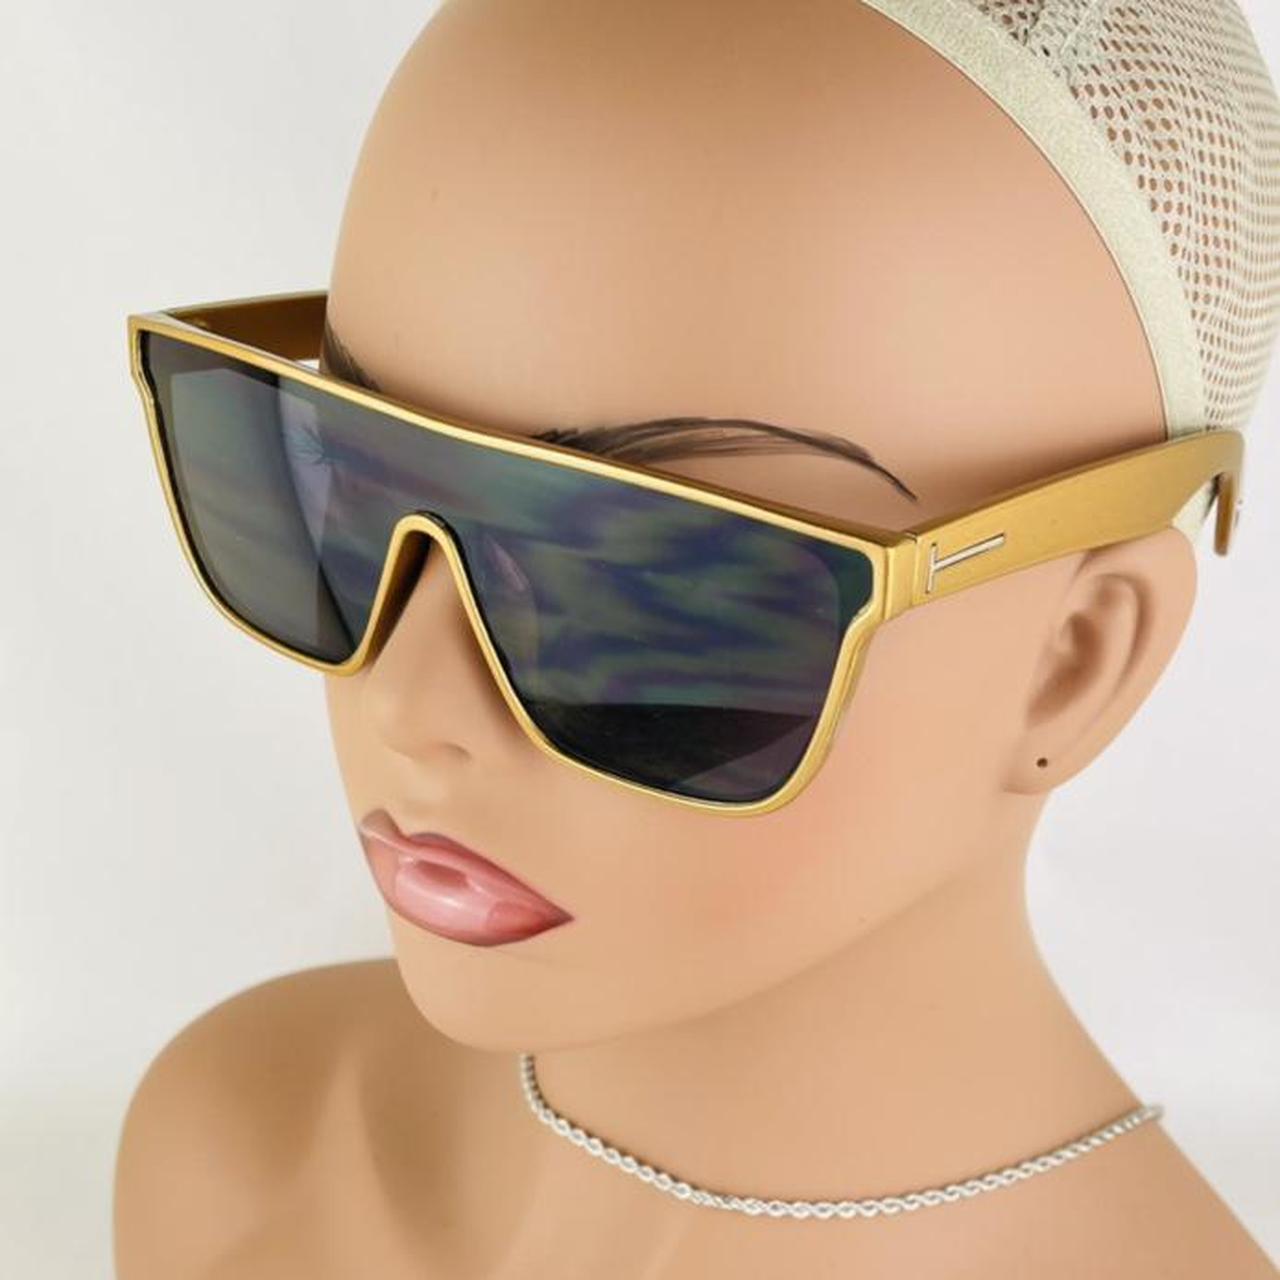 Product Image 1 - Gold frame and dark lenses#